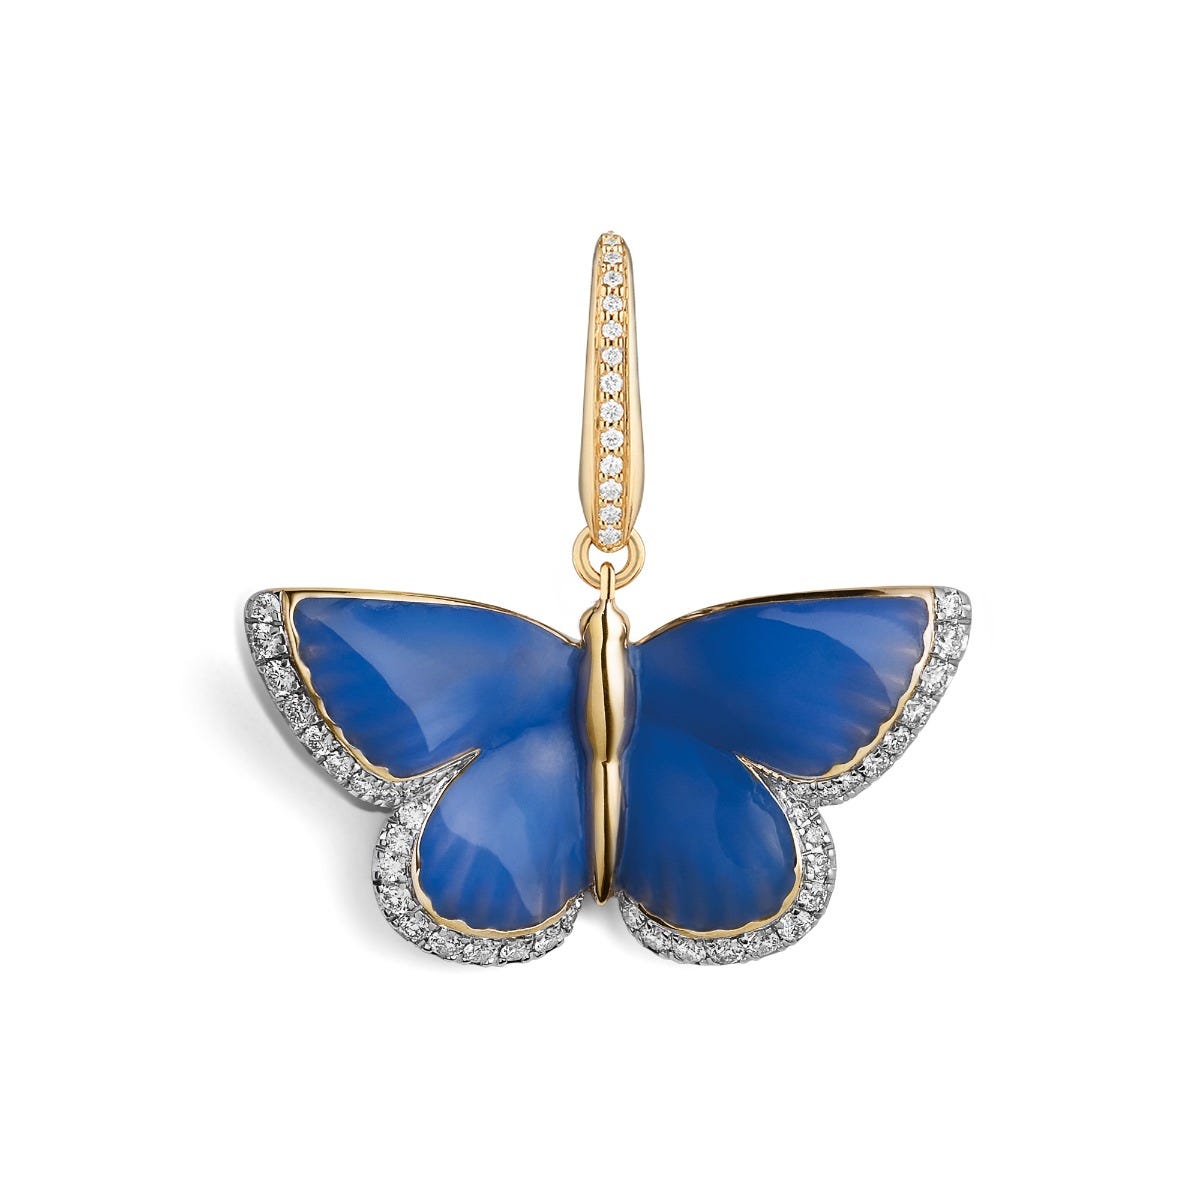 Woodland Blue Butterfly Charm in Enamelled 18ct Yellow Gold with Diamonds